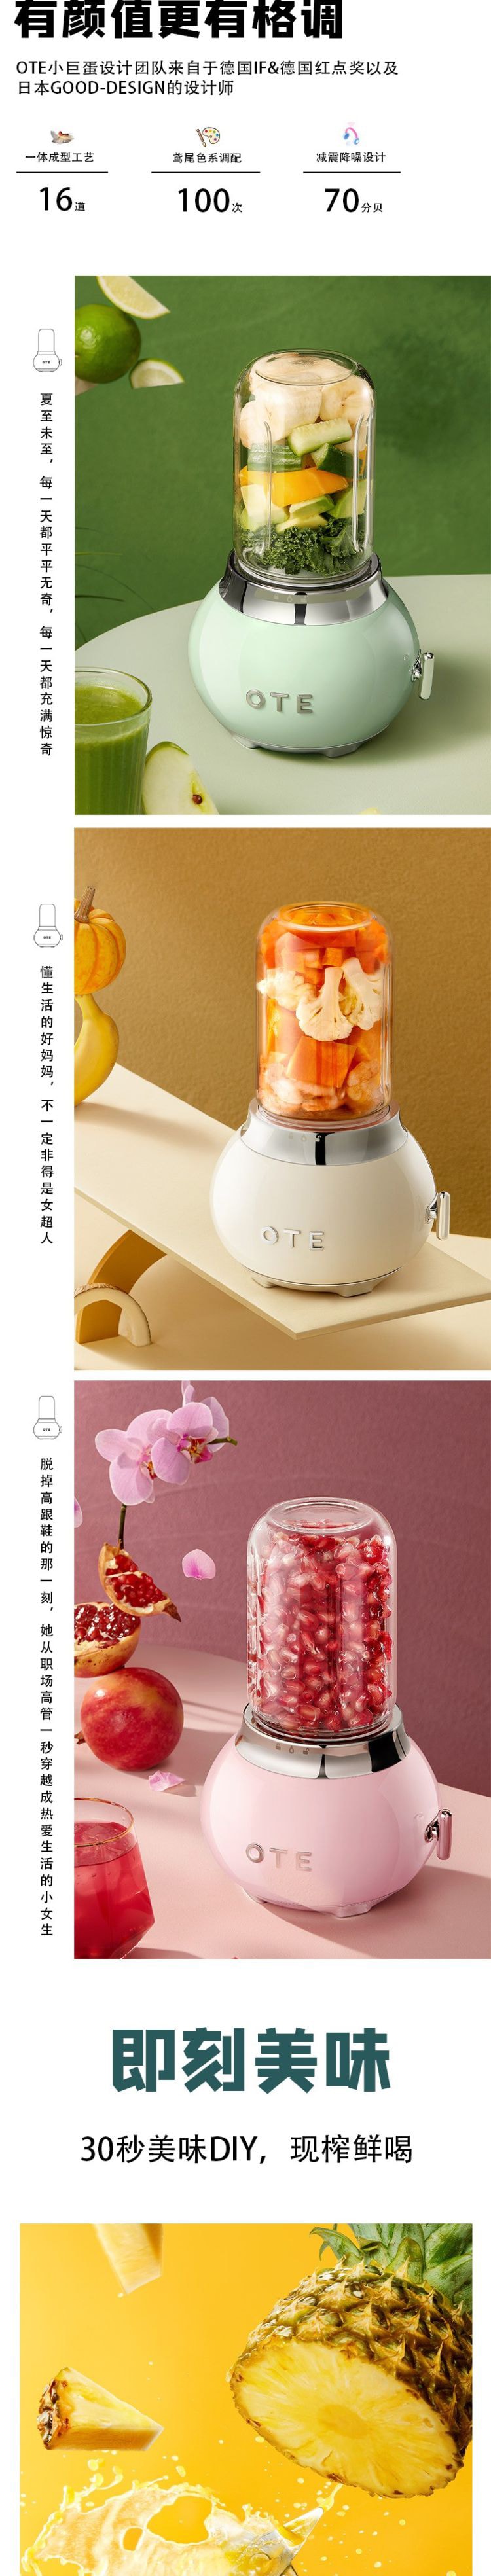 OTE Small Giant Egg Juicer Small Household Portable Multifunctional Juicer Cup 0.4L Milk White 1pc